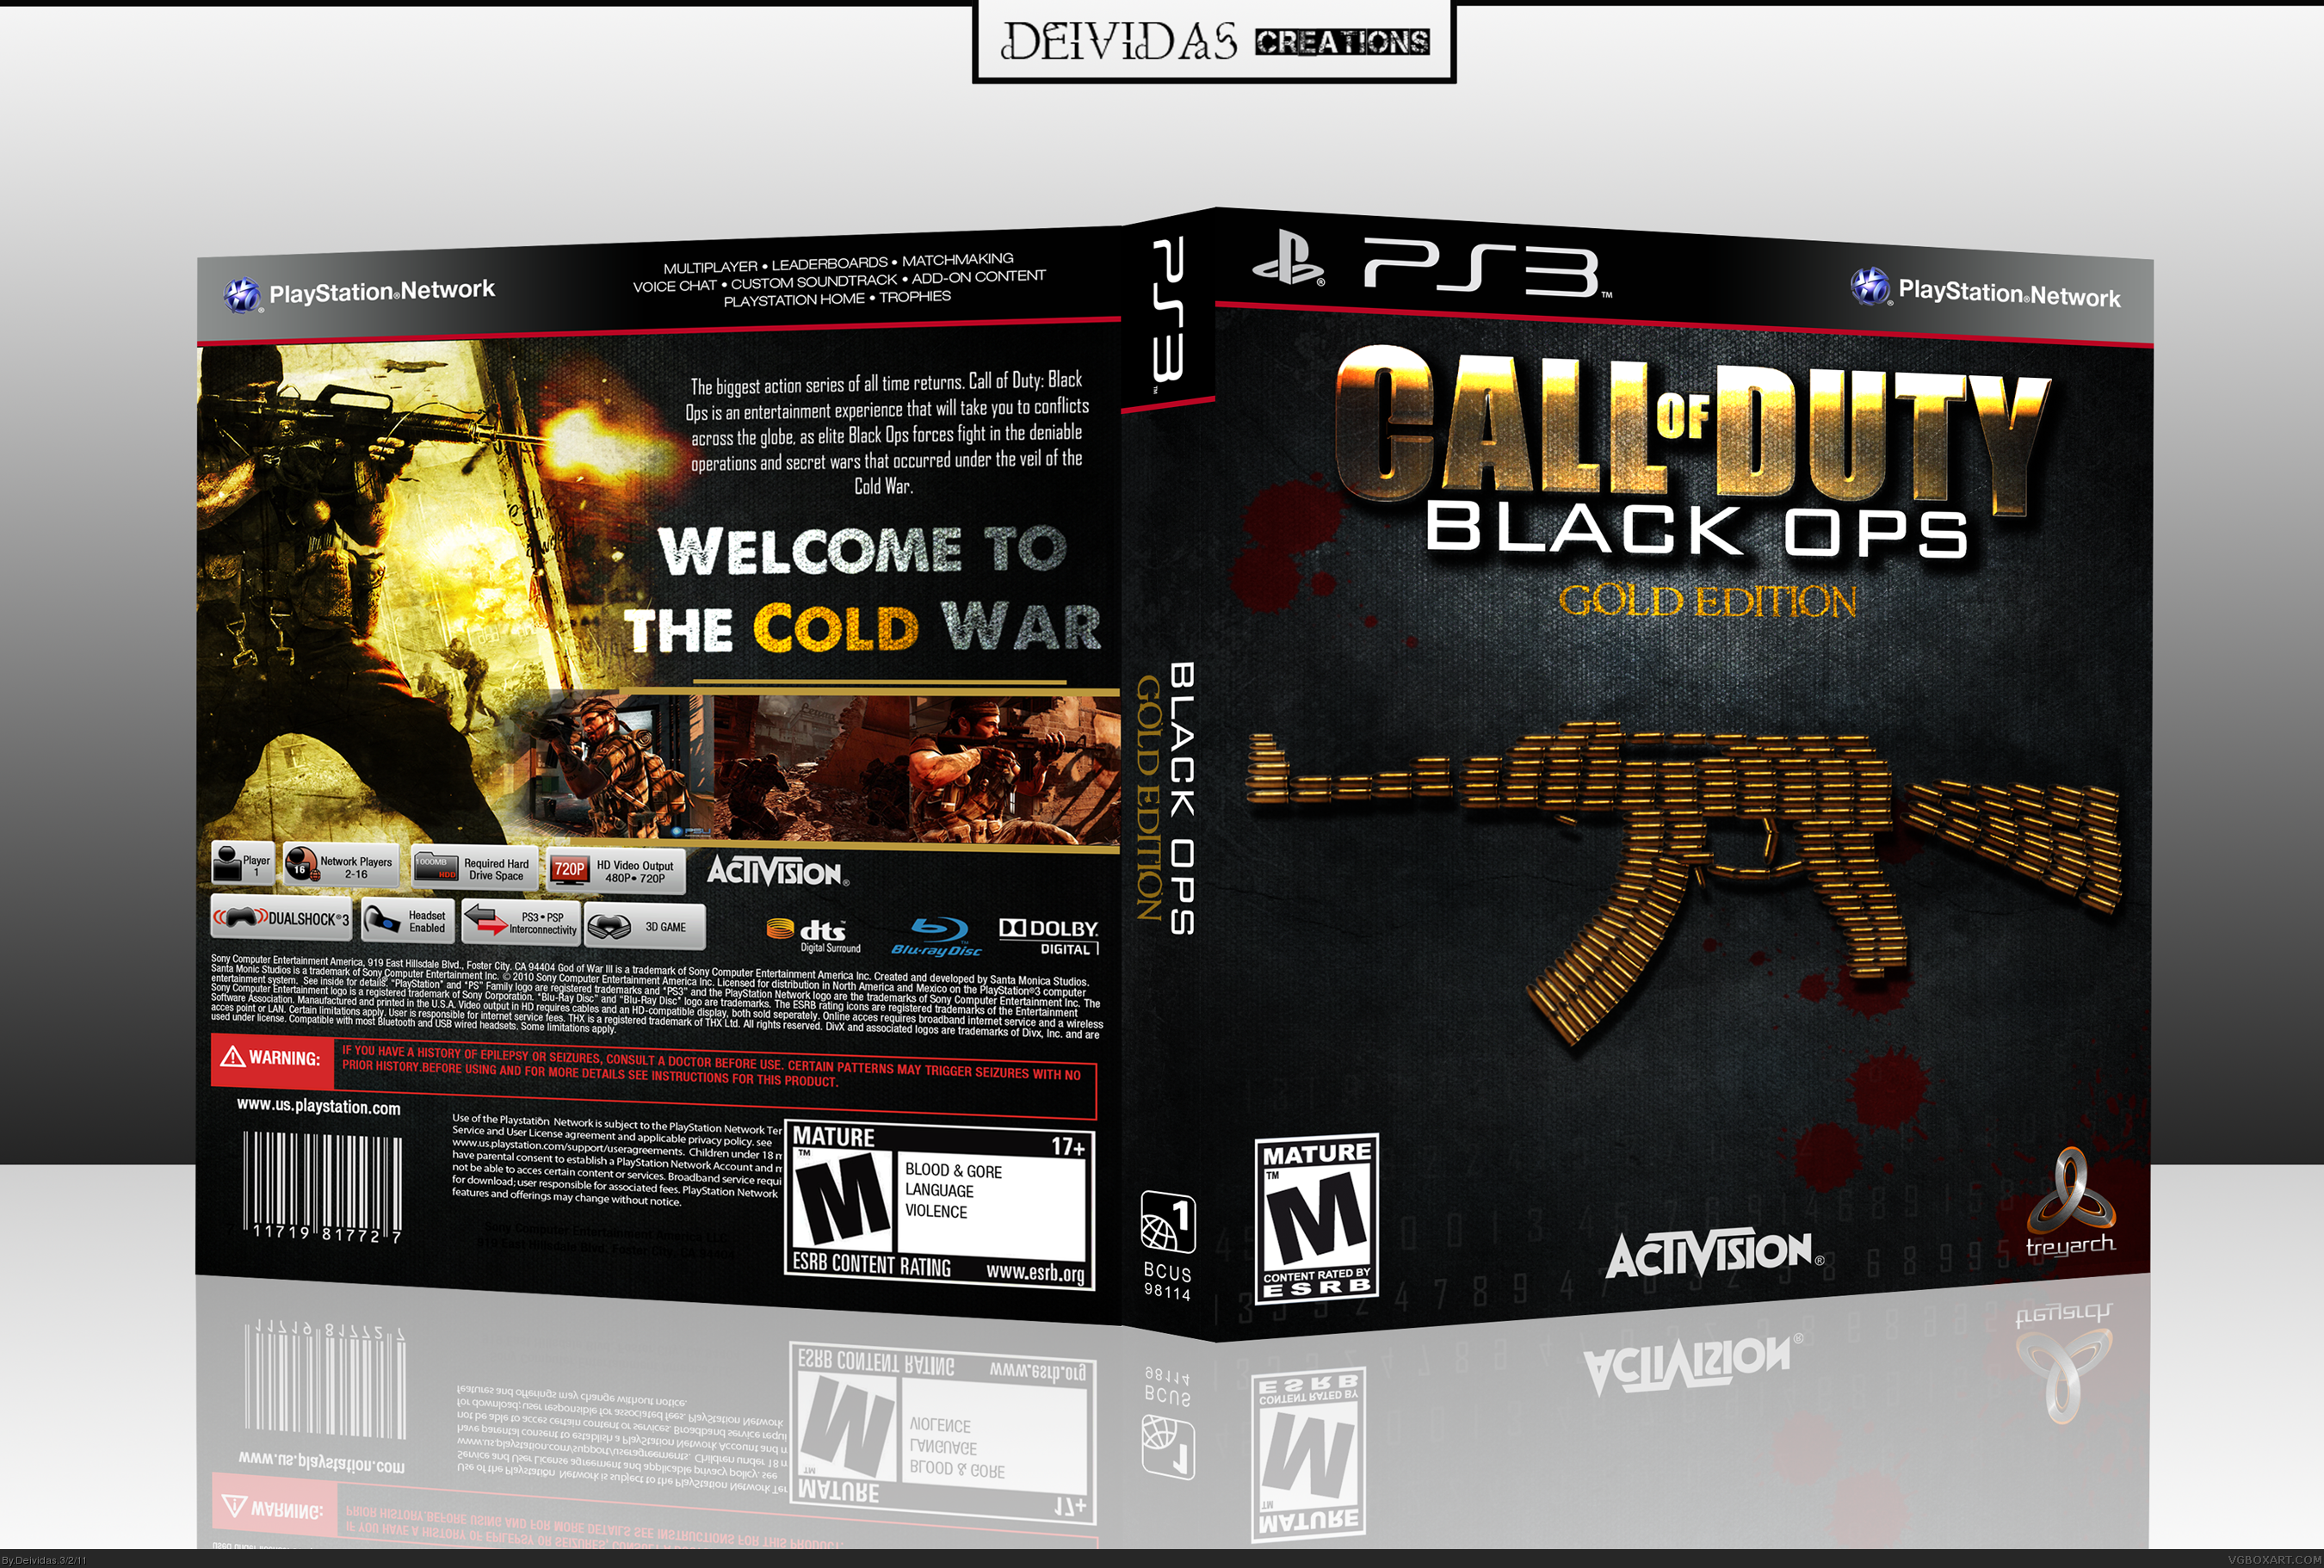 Call of Duty: Black Ops (Gold Edition) box cover